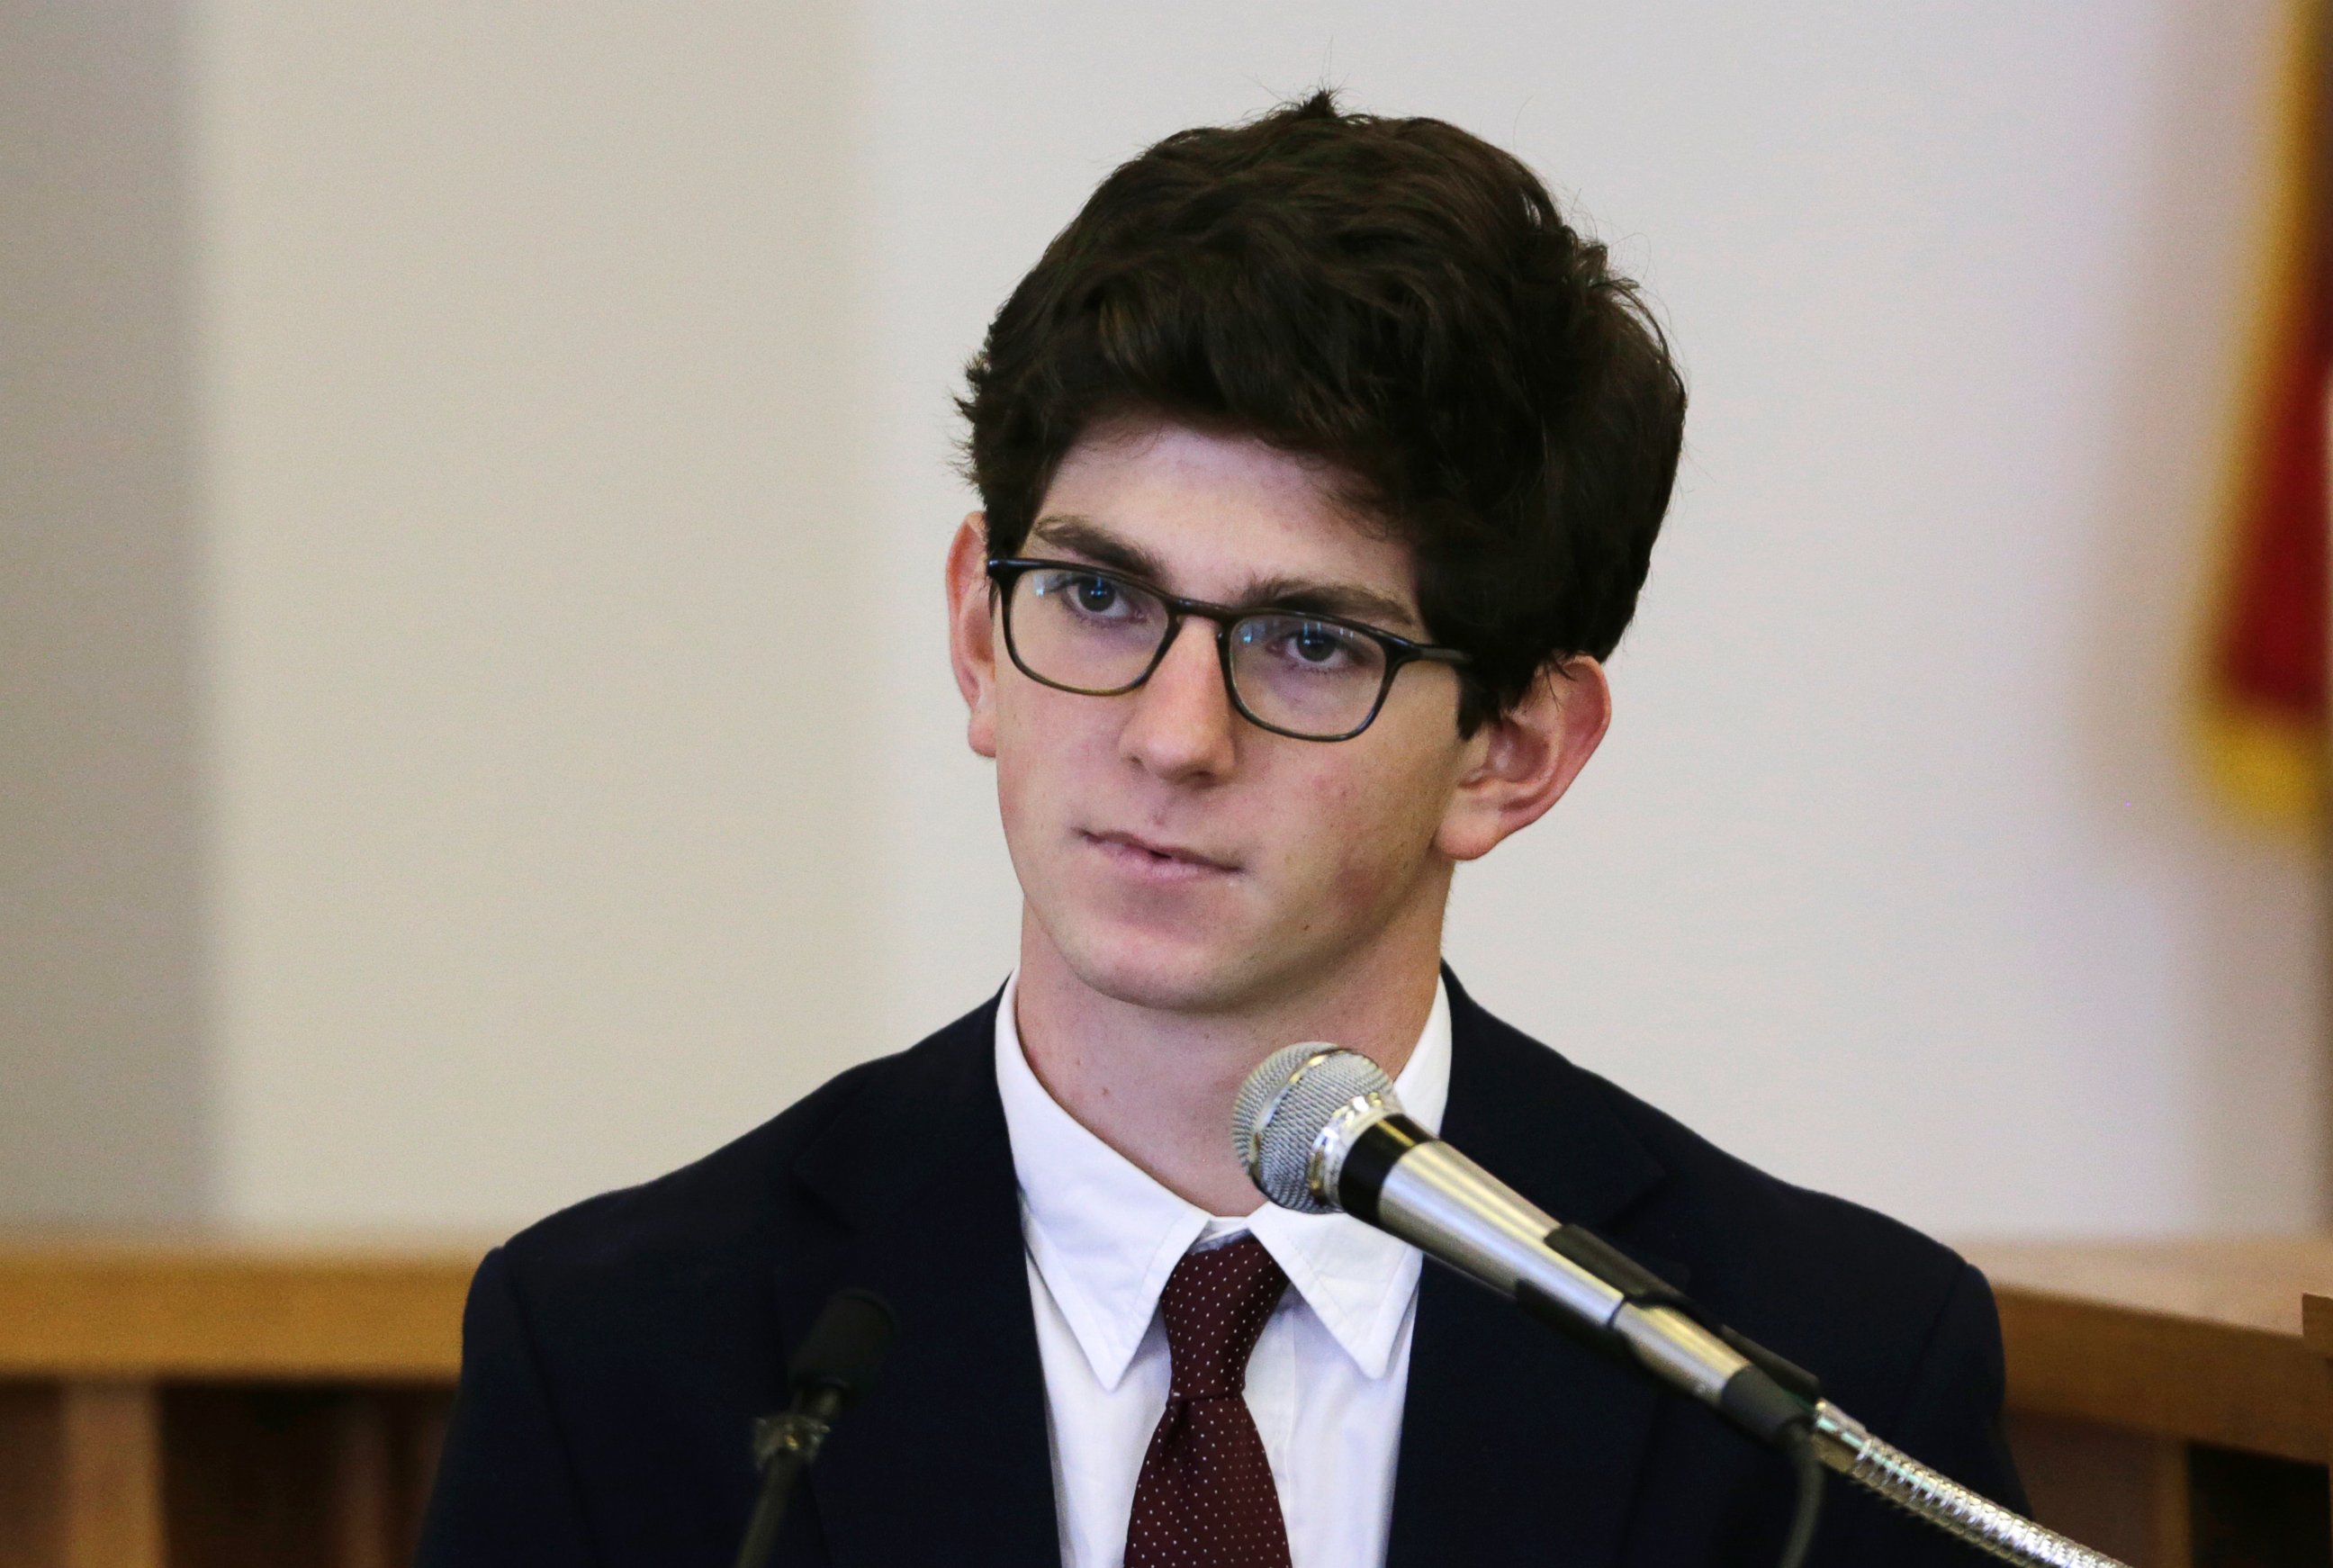 PHOTO:In this Aug. 26, 2015, file photo, former St. Paul's School student Owen Labrie testifies in his trial at Merrimack Superior Court in Concord, N.H. 